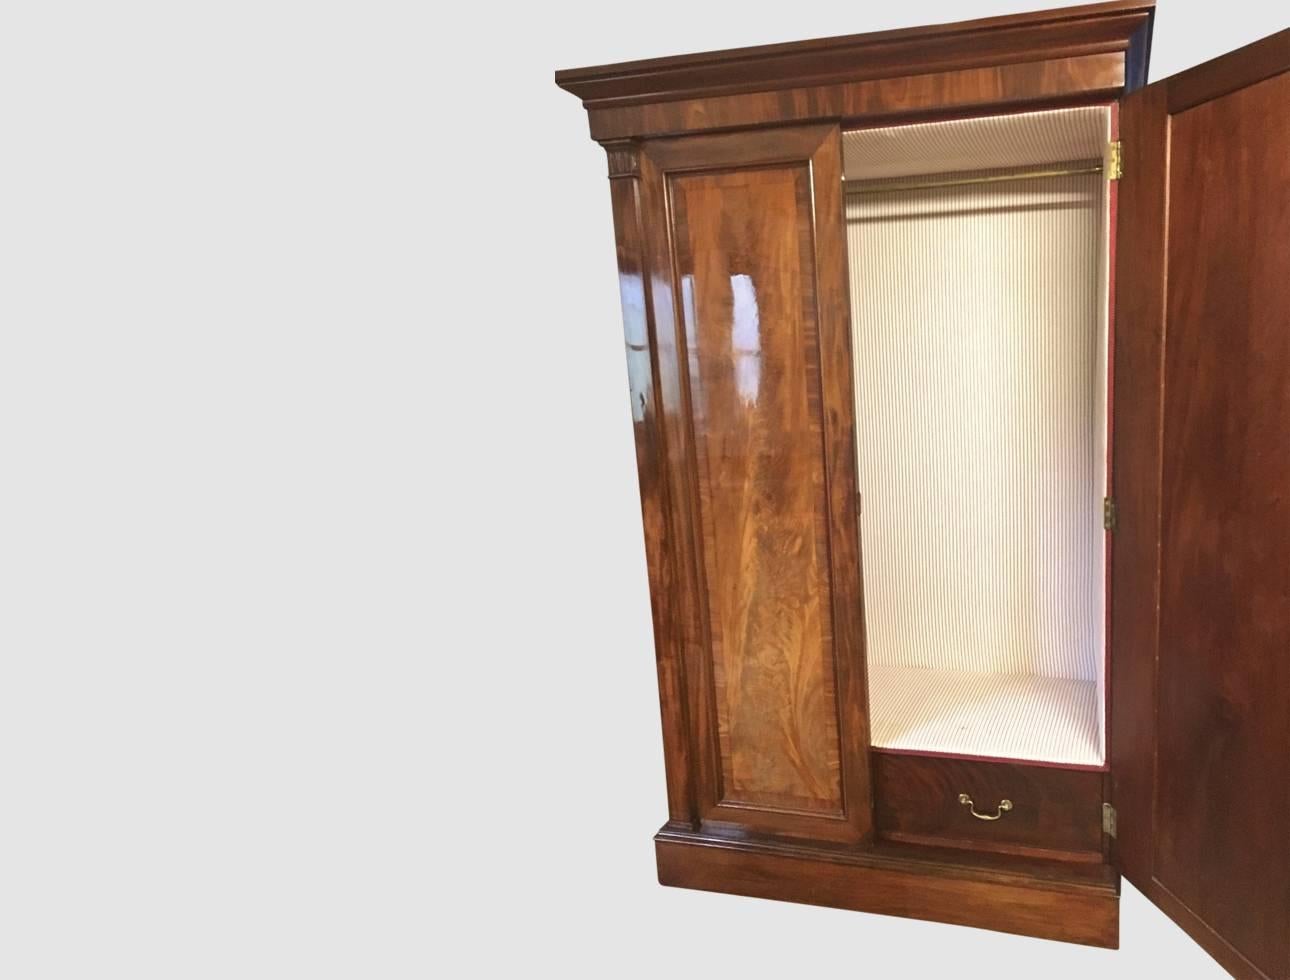 Superb two-door mahogany wardrobe with a fitted interior, English, circa 1830.
 
This delightful wardrobe is in richly figured mahogany with a good antique patination. The doors are flat and true, closing well with fitted key. The interior is